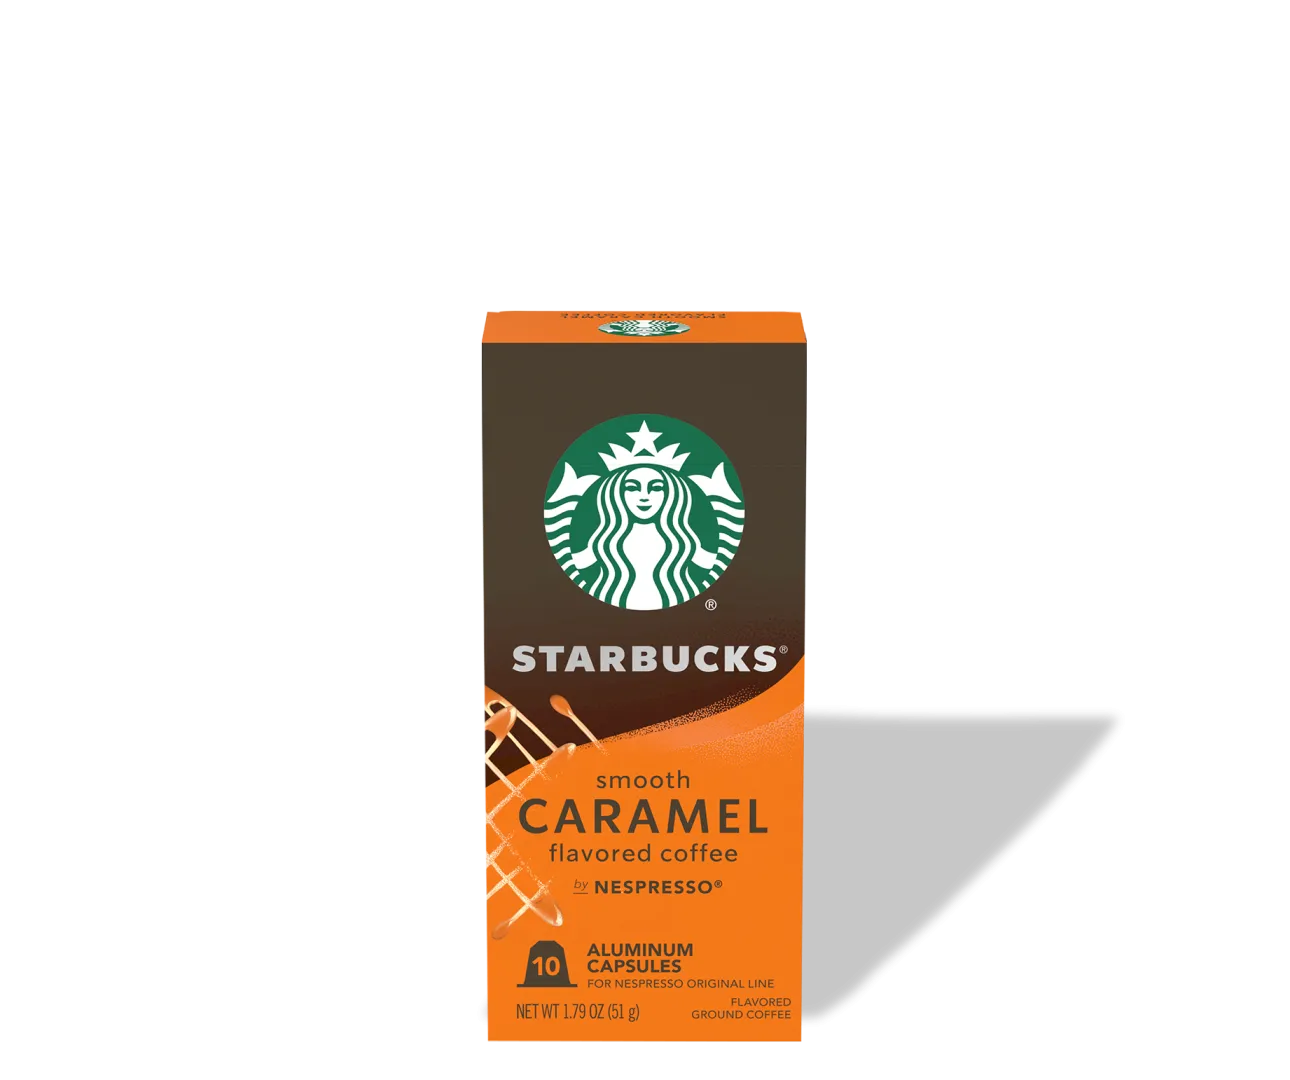 https://athome.starbucks.com/sites/default/files/styles/pdp_gallery_xlarge/public/2023-04/SBUX_Nespresso_CAH_CaramelOL_shadow.png.webp?itok=PhMUOrrn